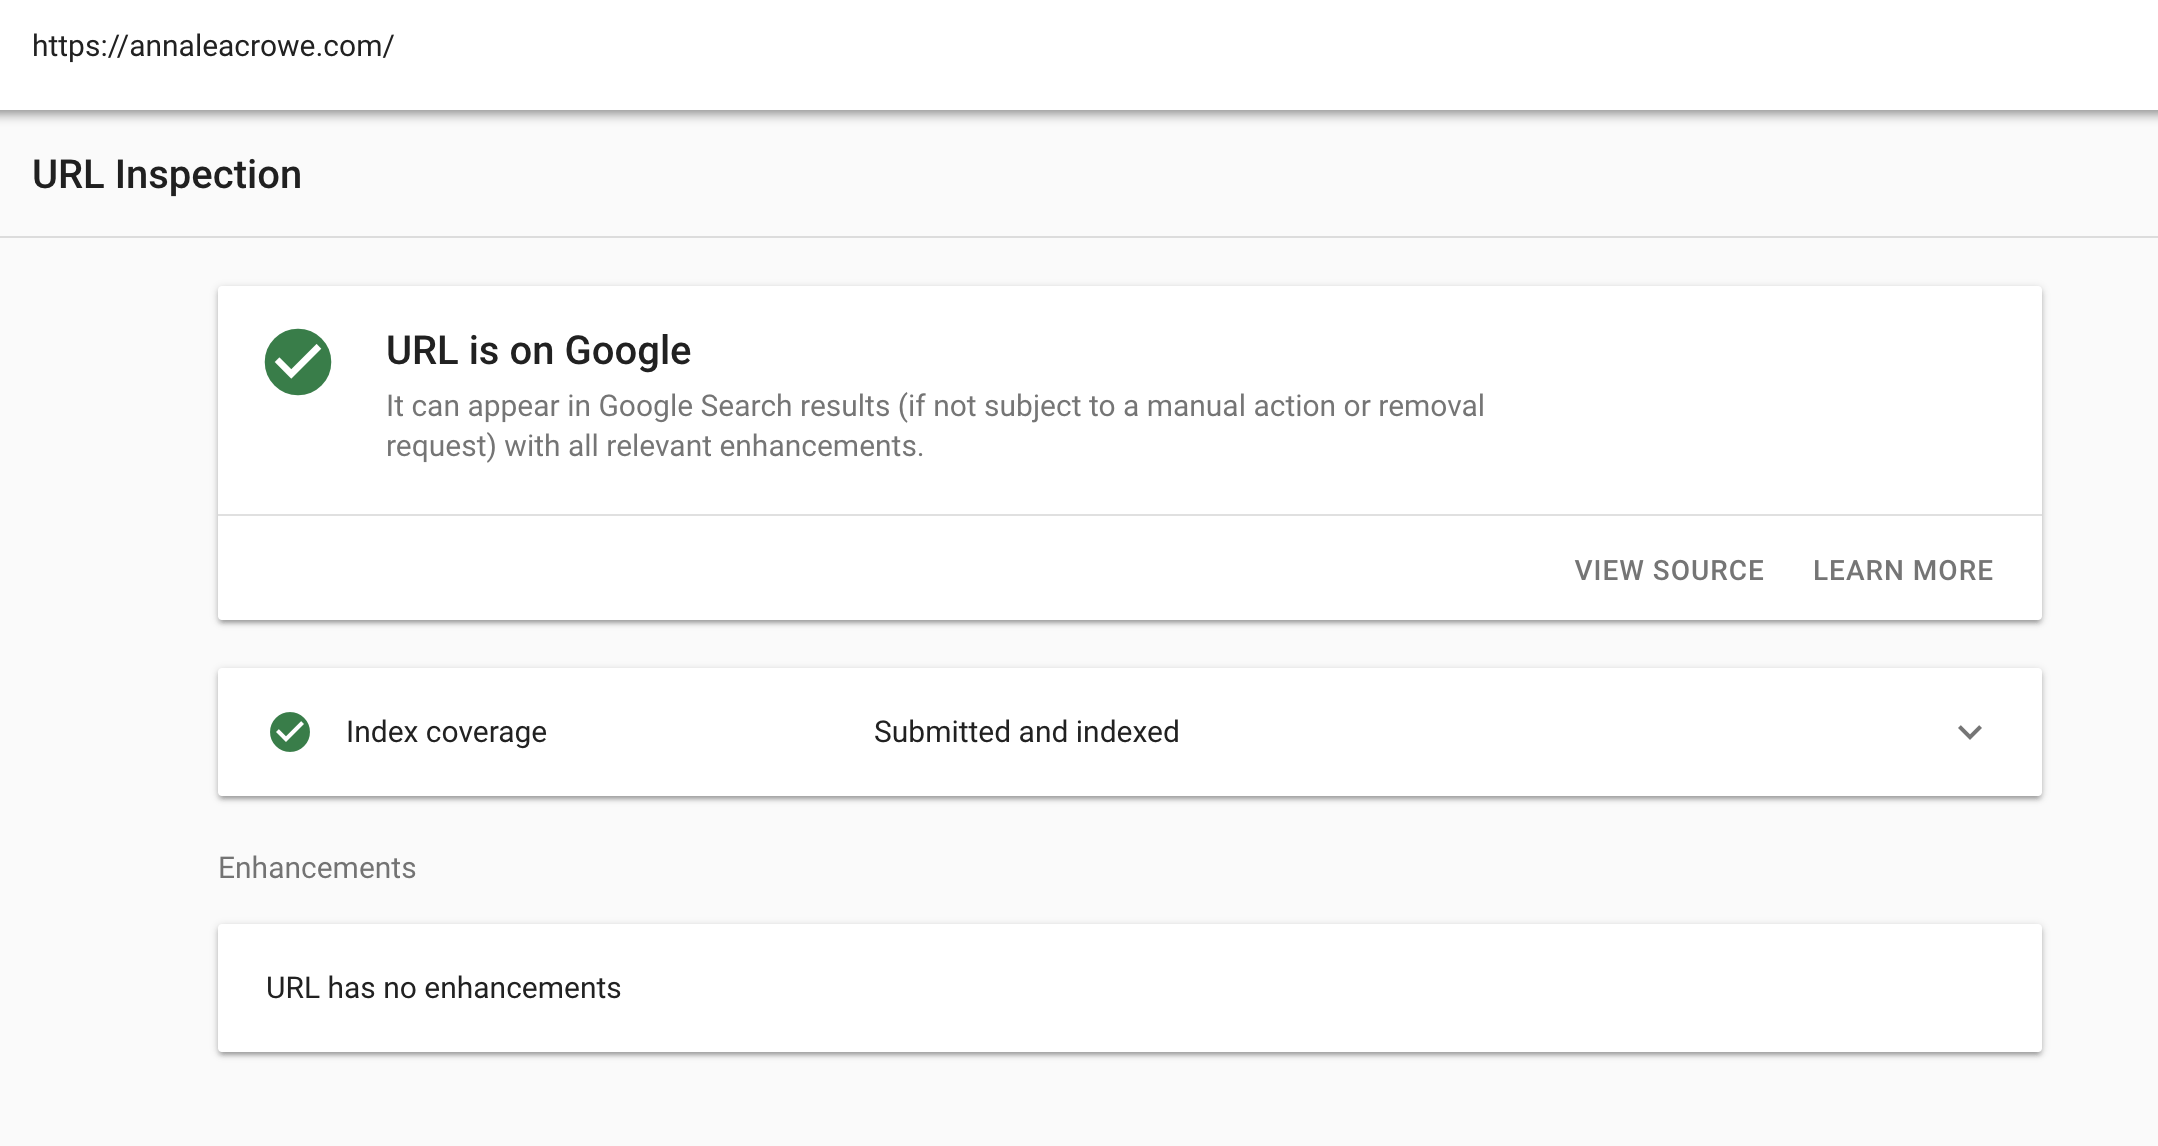 URL inspection tool in Google Search Console